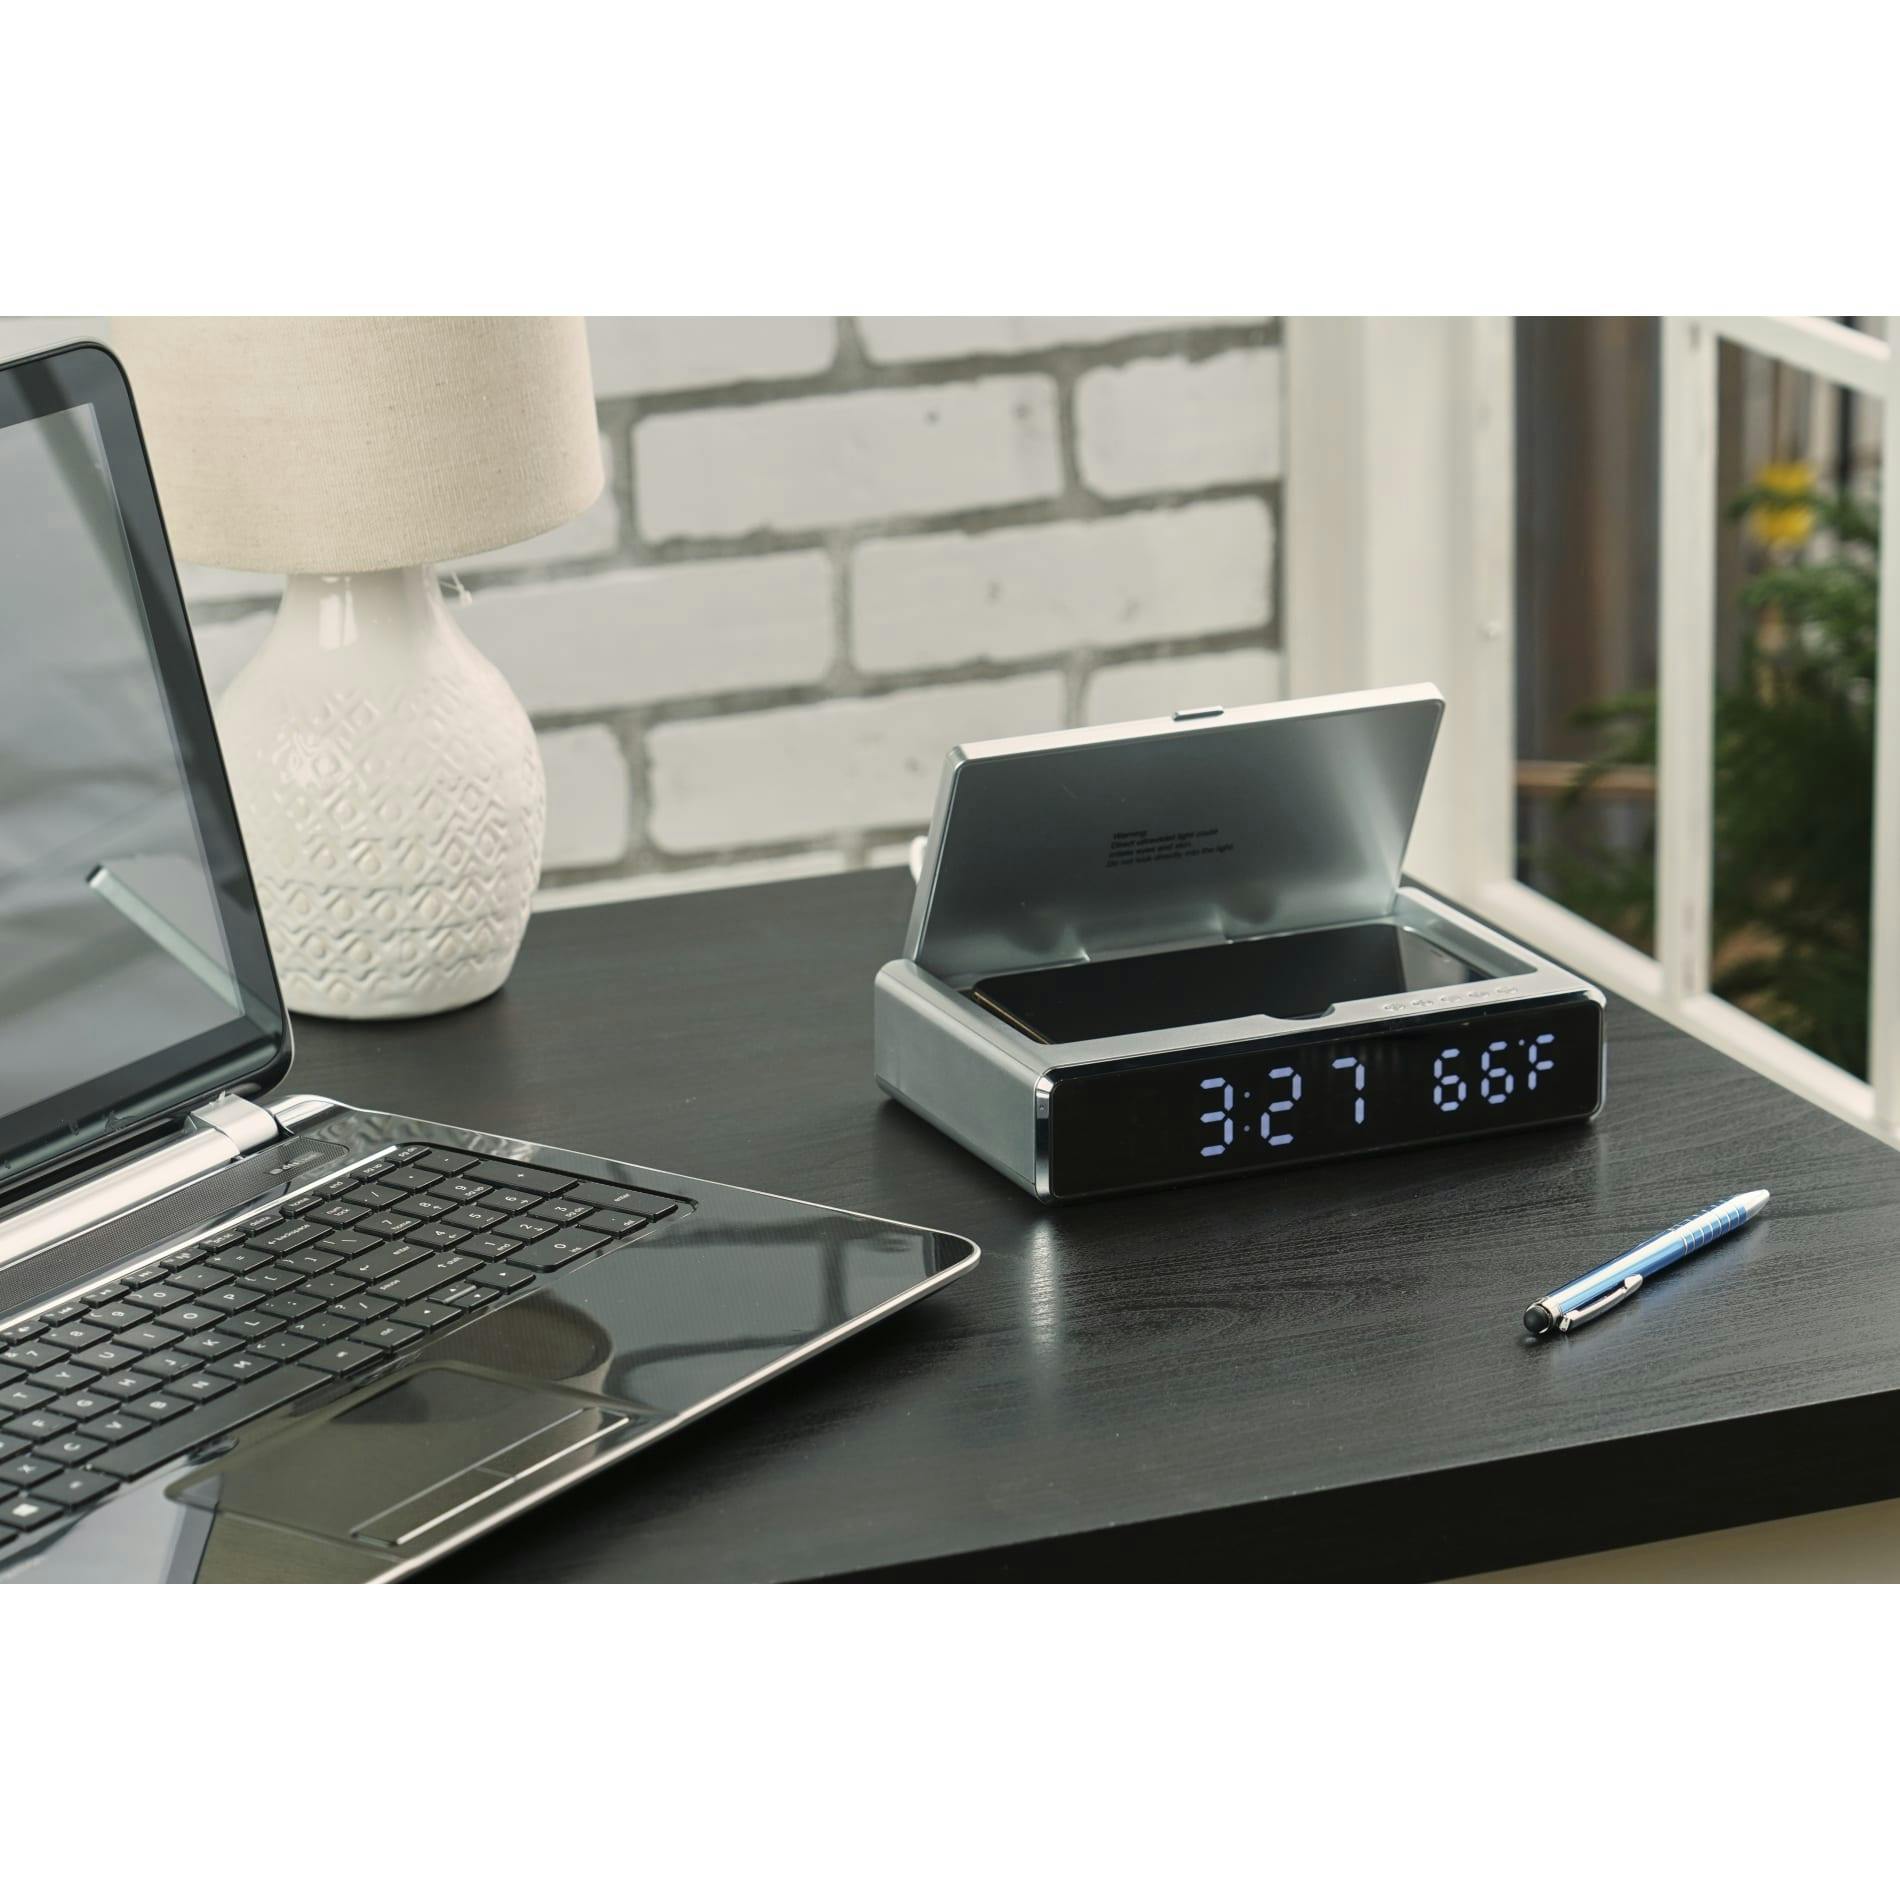 UV Sanitizer Desk Clock with Wireless Charging - additional Image 2